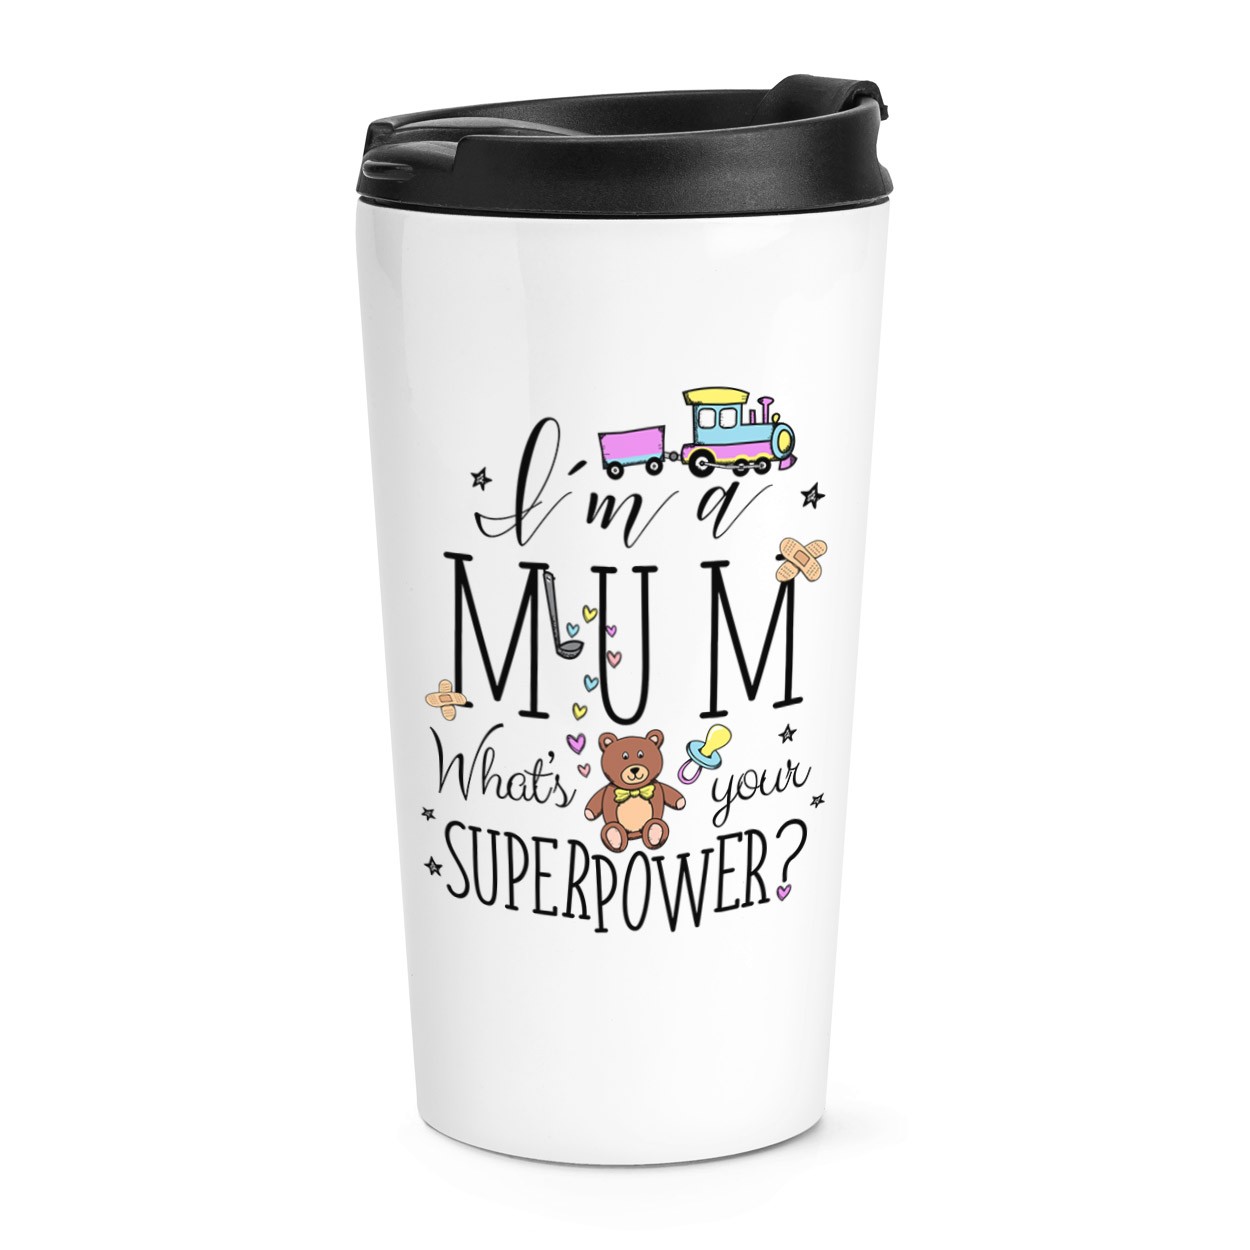 I'm A Mum What's Your Superpower Travel Mug Cup